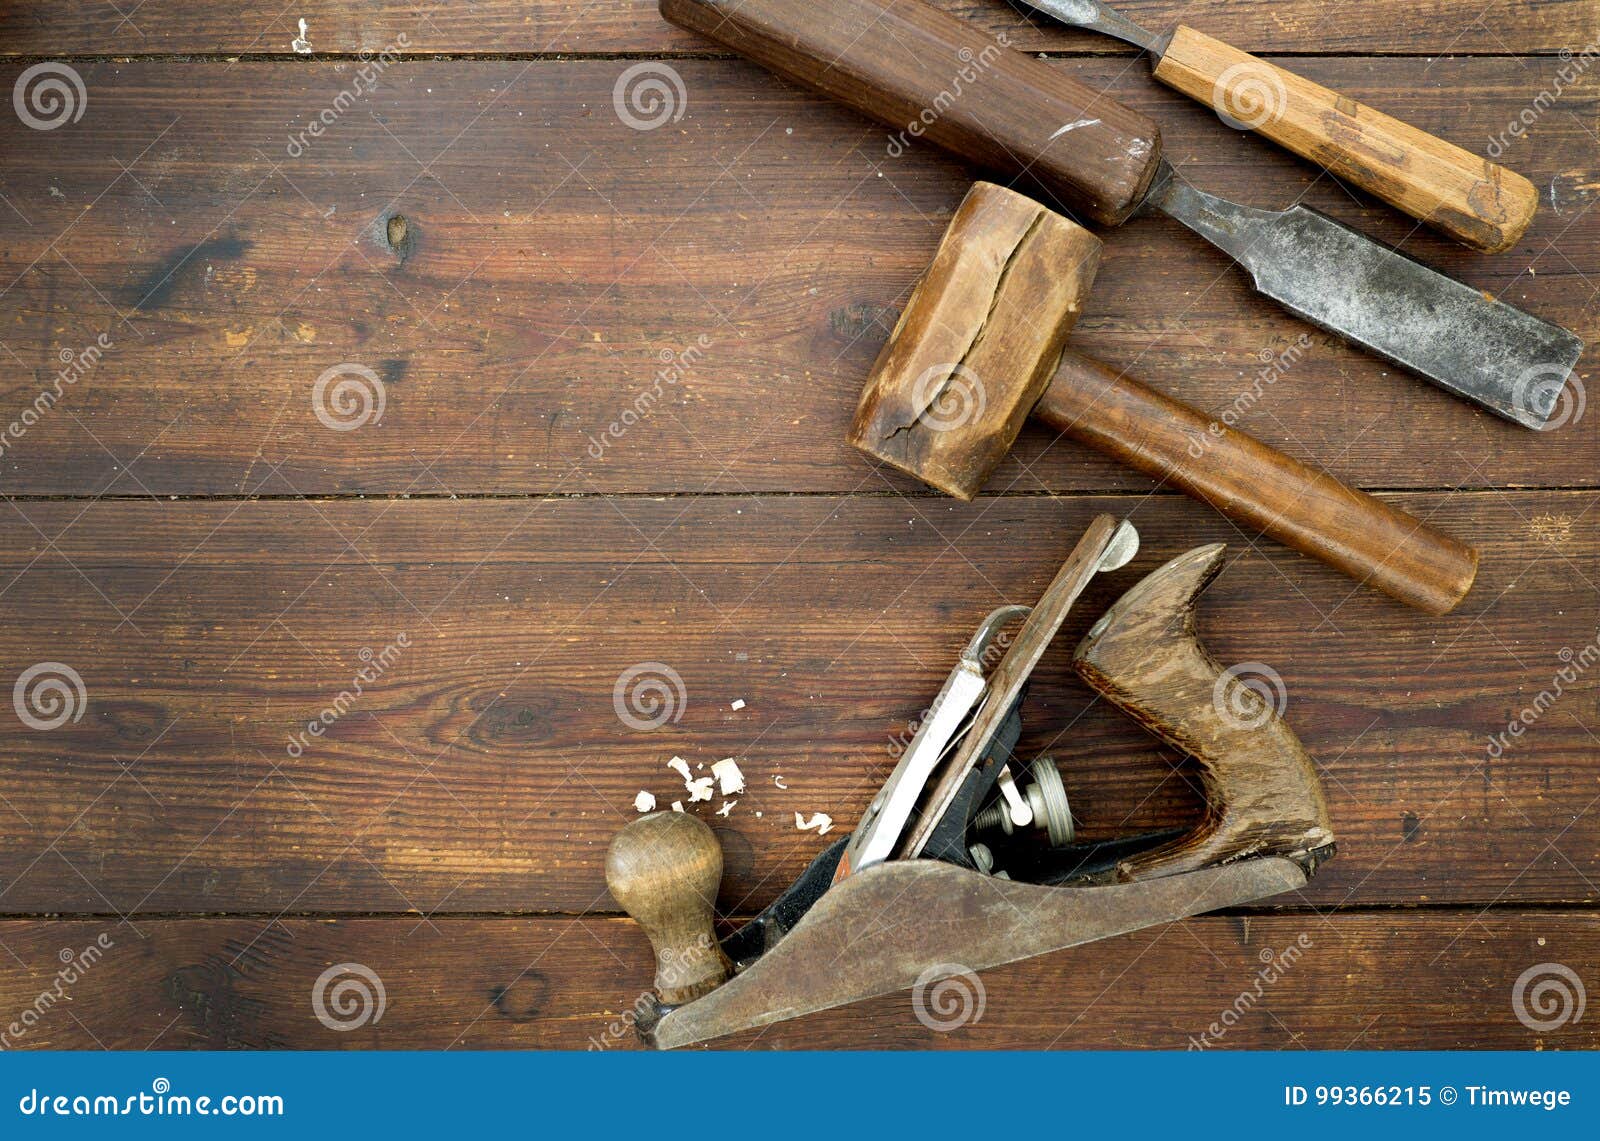 woodwork tools on table